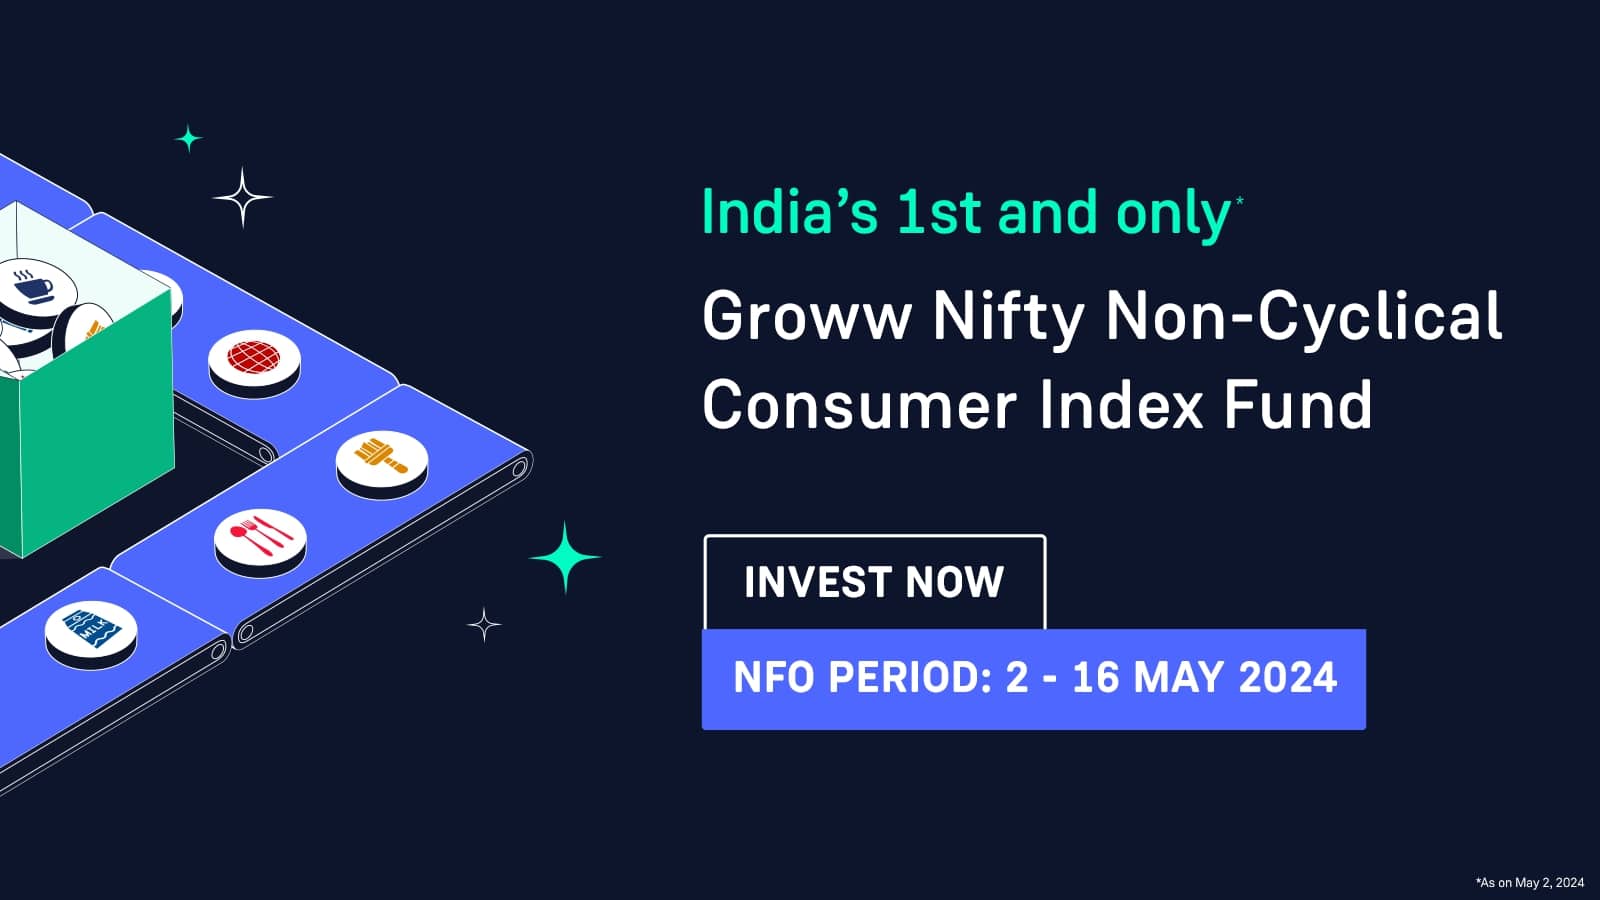 Groww Nifty Non-Cyclical Consumer Index Fund Now Open for Subscription Between 2nd-16th May 2024